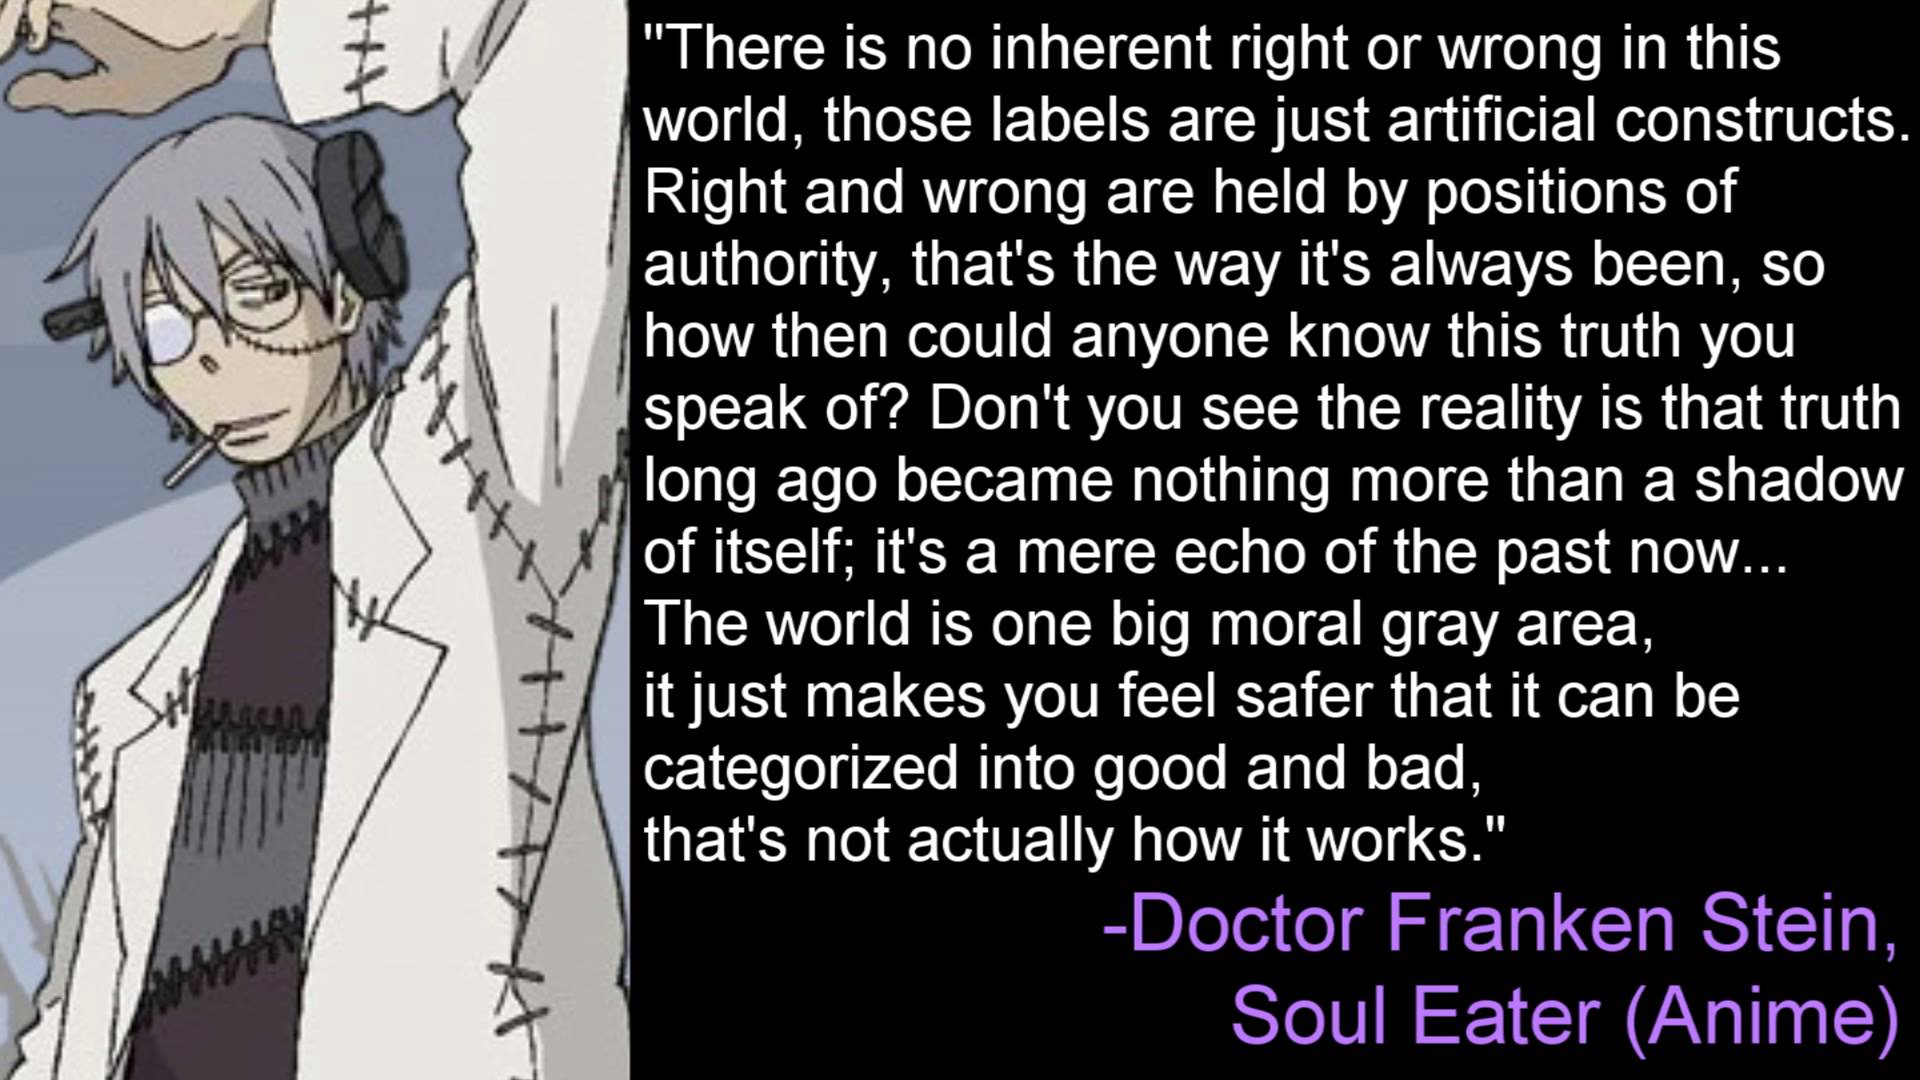 No Inherent Right or Wrong Franken Stein, Soul Eater